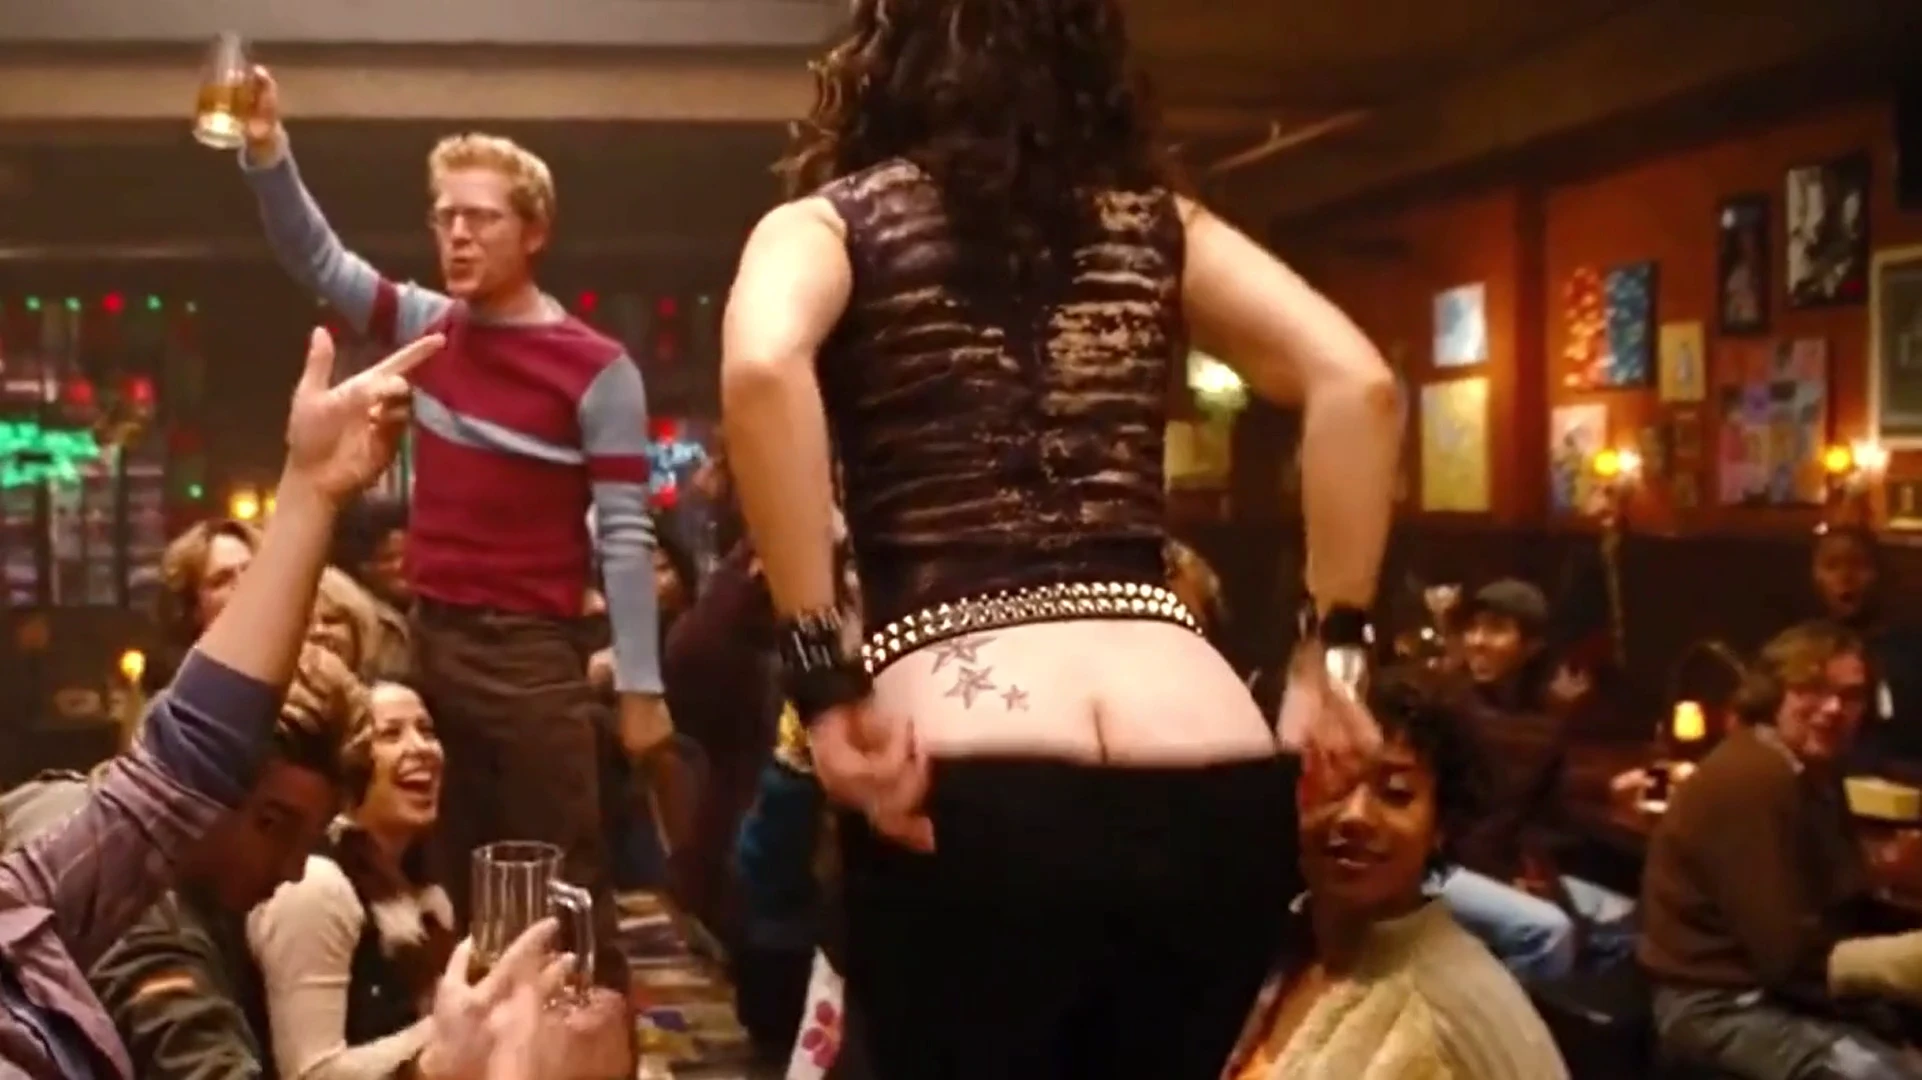 Rent (2005), PG-13, Idina Menzel (mooning full ass). If anyone is interested, I have this sub that focuses on female nudity in PG and PG-13 movies